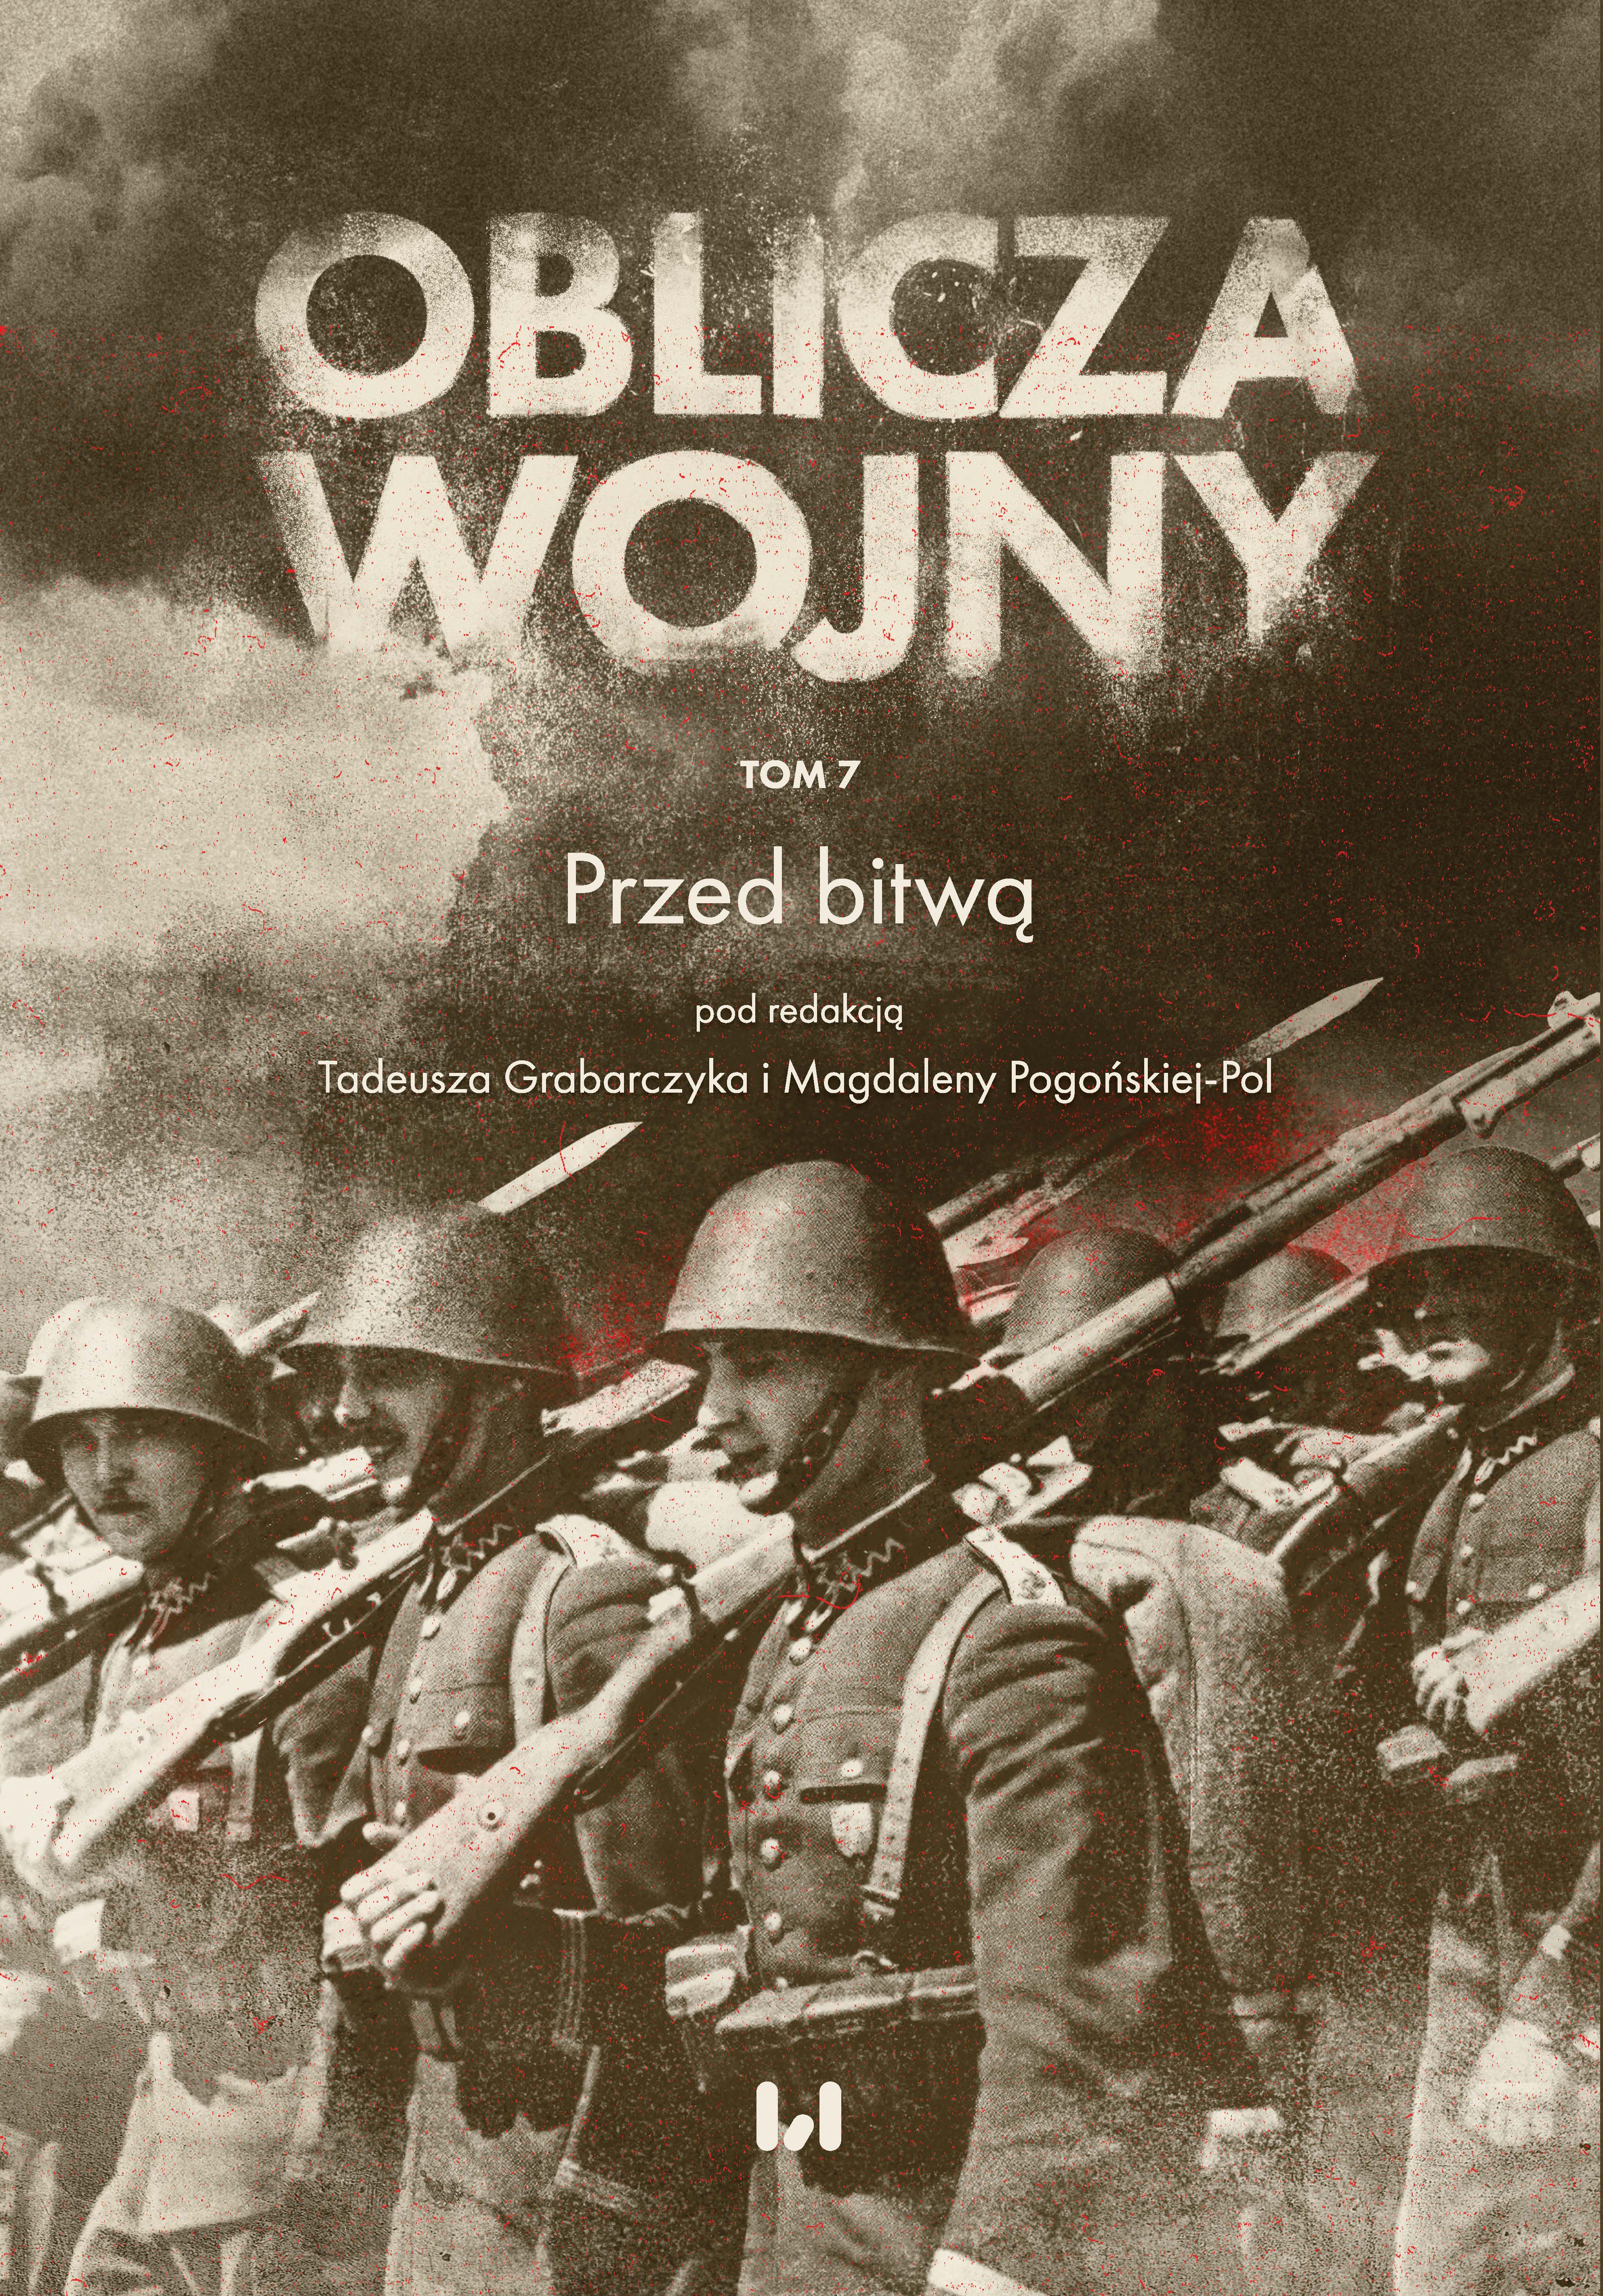 Pro-defence activities of women’s organisations during the wars for independence and the establishment of the Polish borders in the years 1914–1921